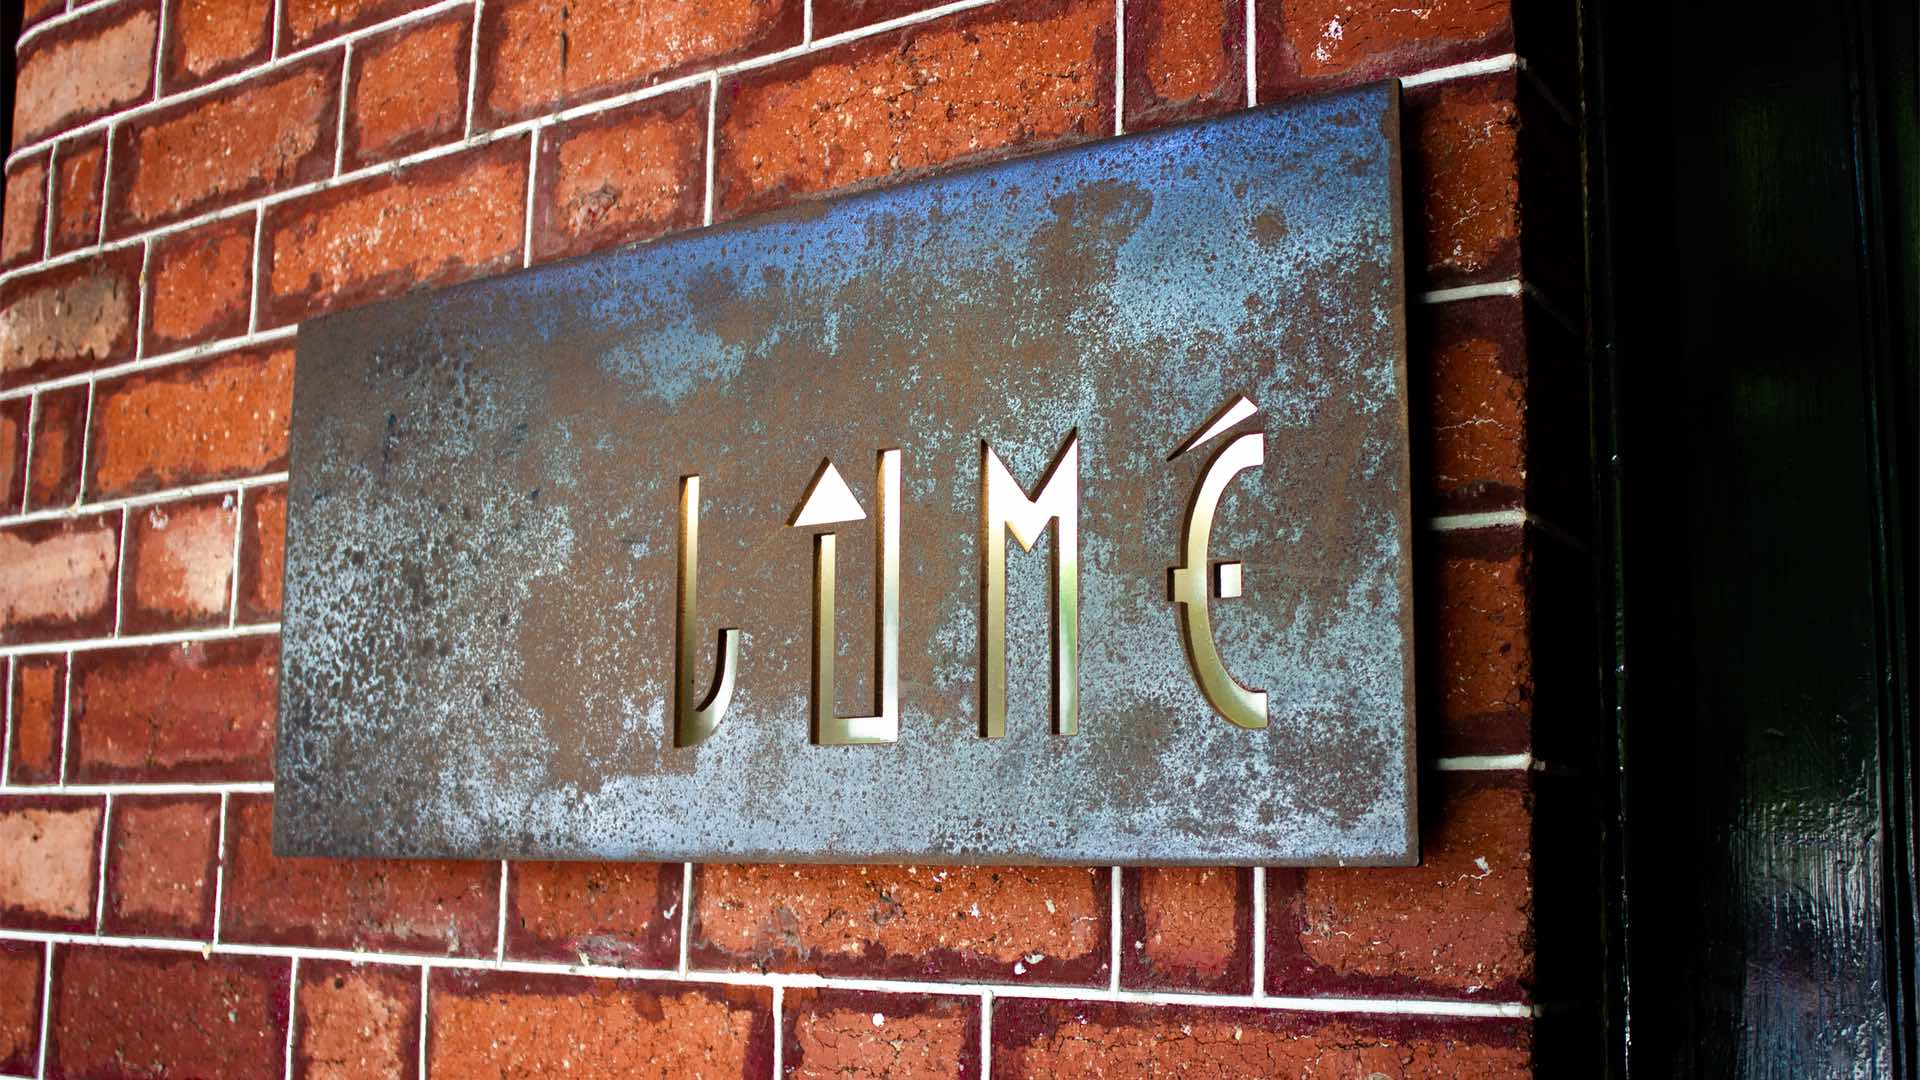 South Melbourne Fine Diner Lume Has Launched Into 2019 with a New Chef and Menu